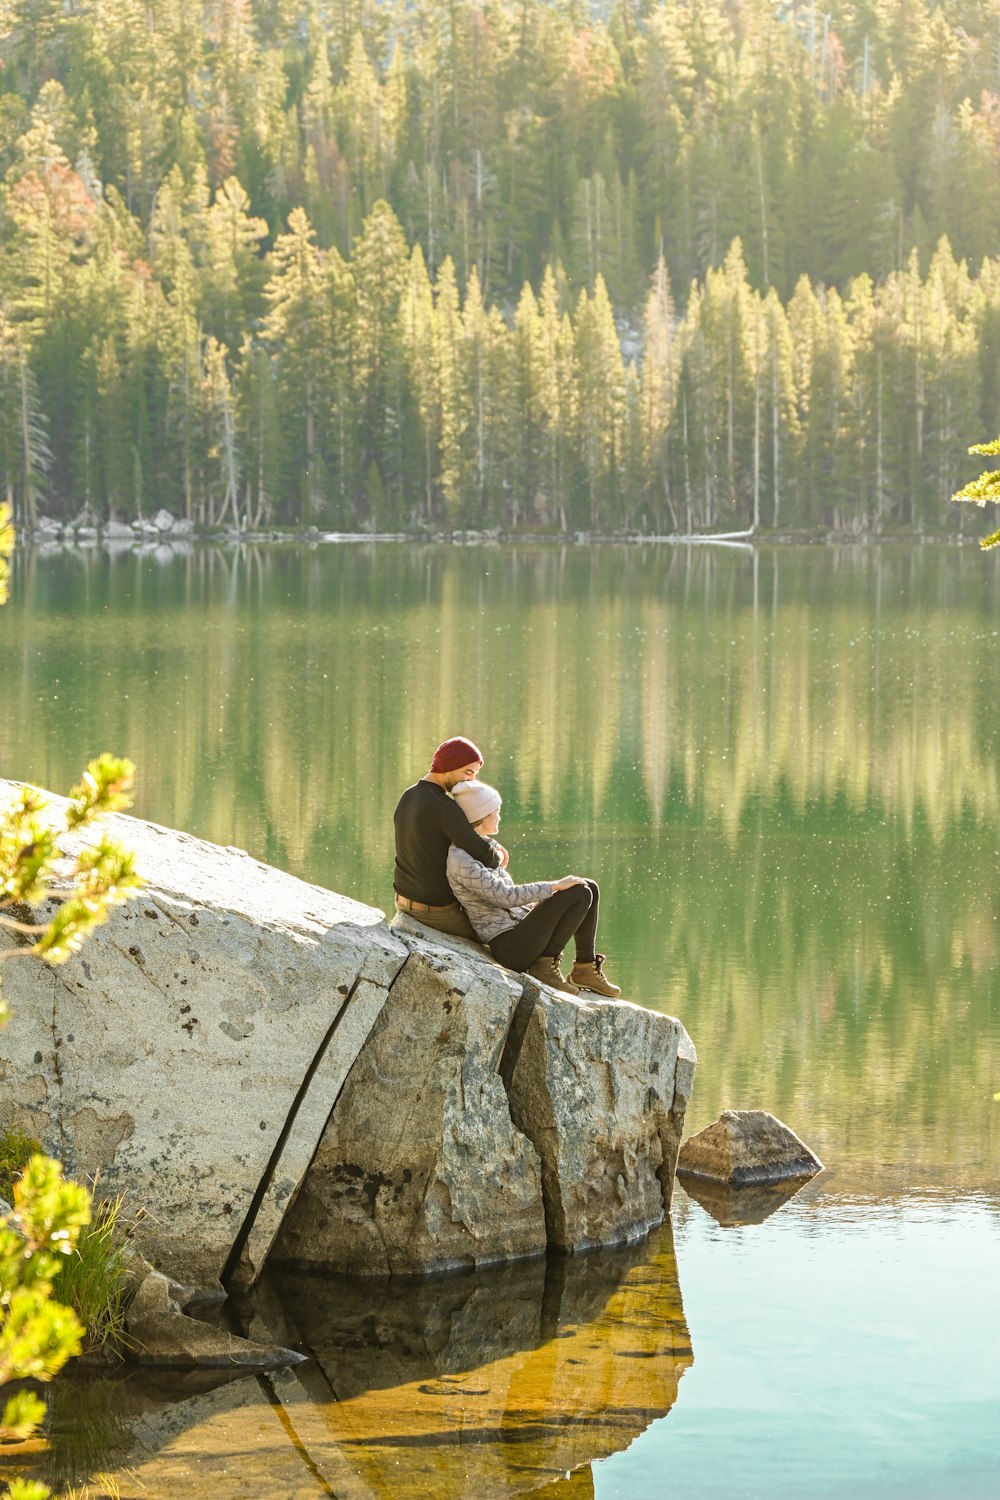 a person sitting on a rock by a lake with trees in the background